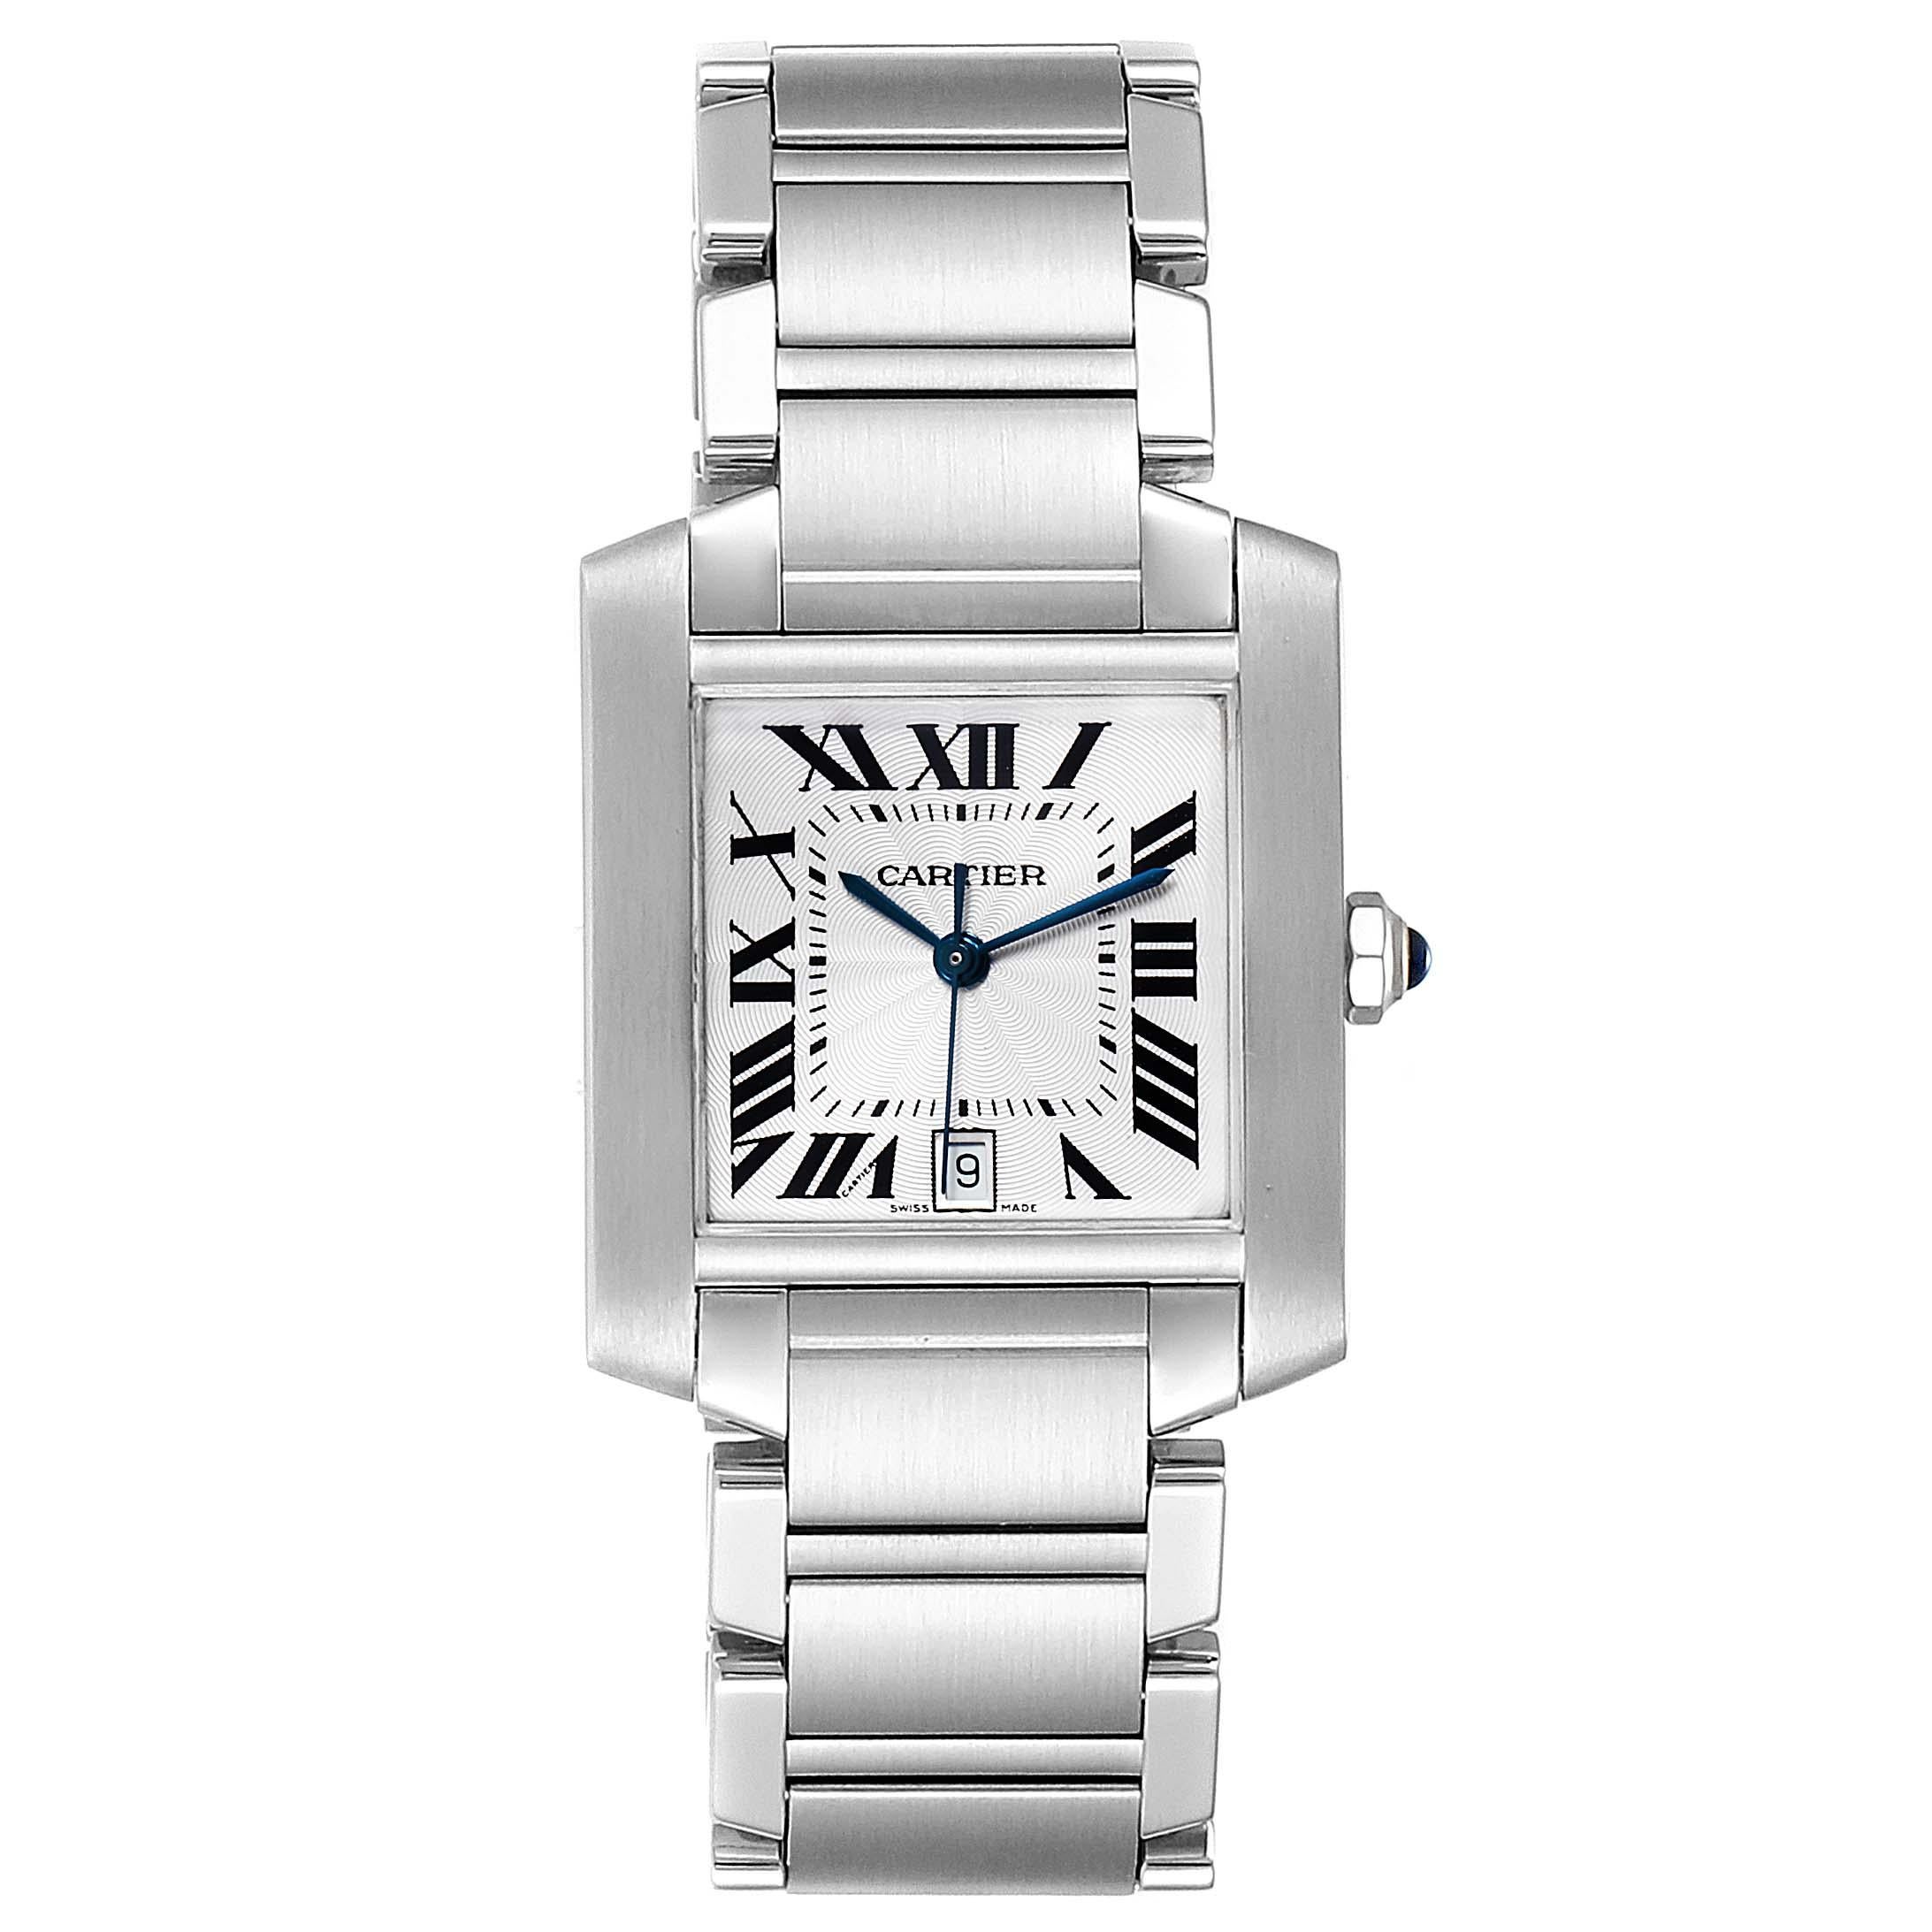 Cartier Tank Francaise Silver Dial Automatic Steel Mens Watch W51002Q3. Automatic self-winding movement. Rectangular stainless steel 28.0 x 32.0 mm case. Octagonal crown set with a blue spinel cabochon. . Scratch resistant sapphire crystal. Silver